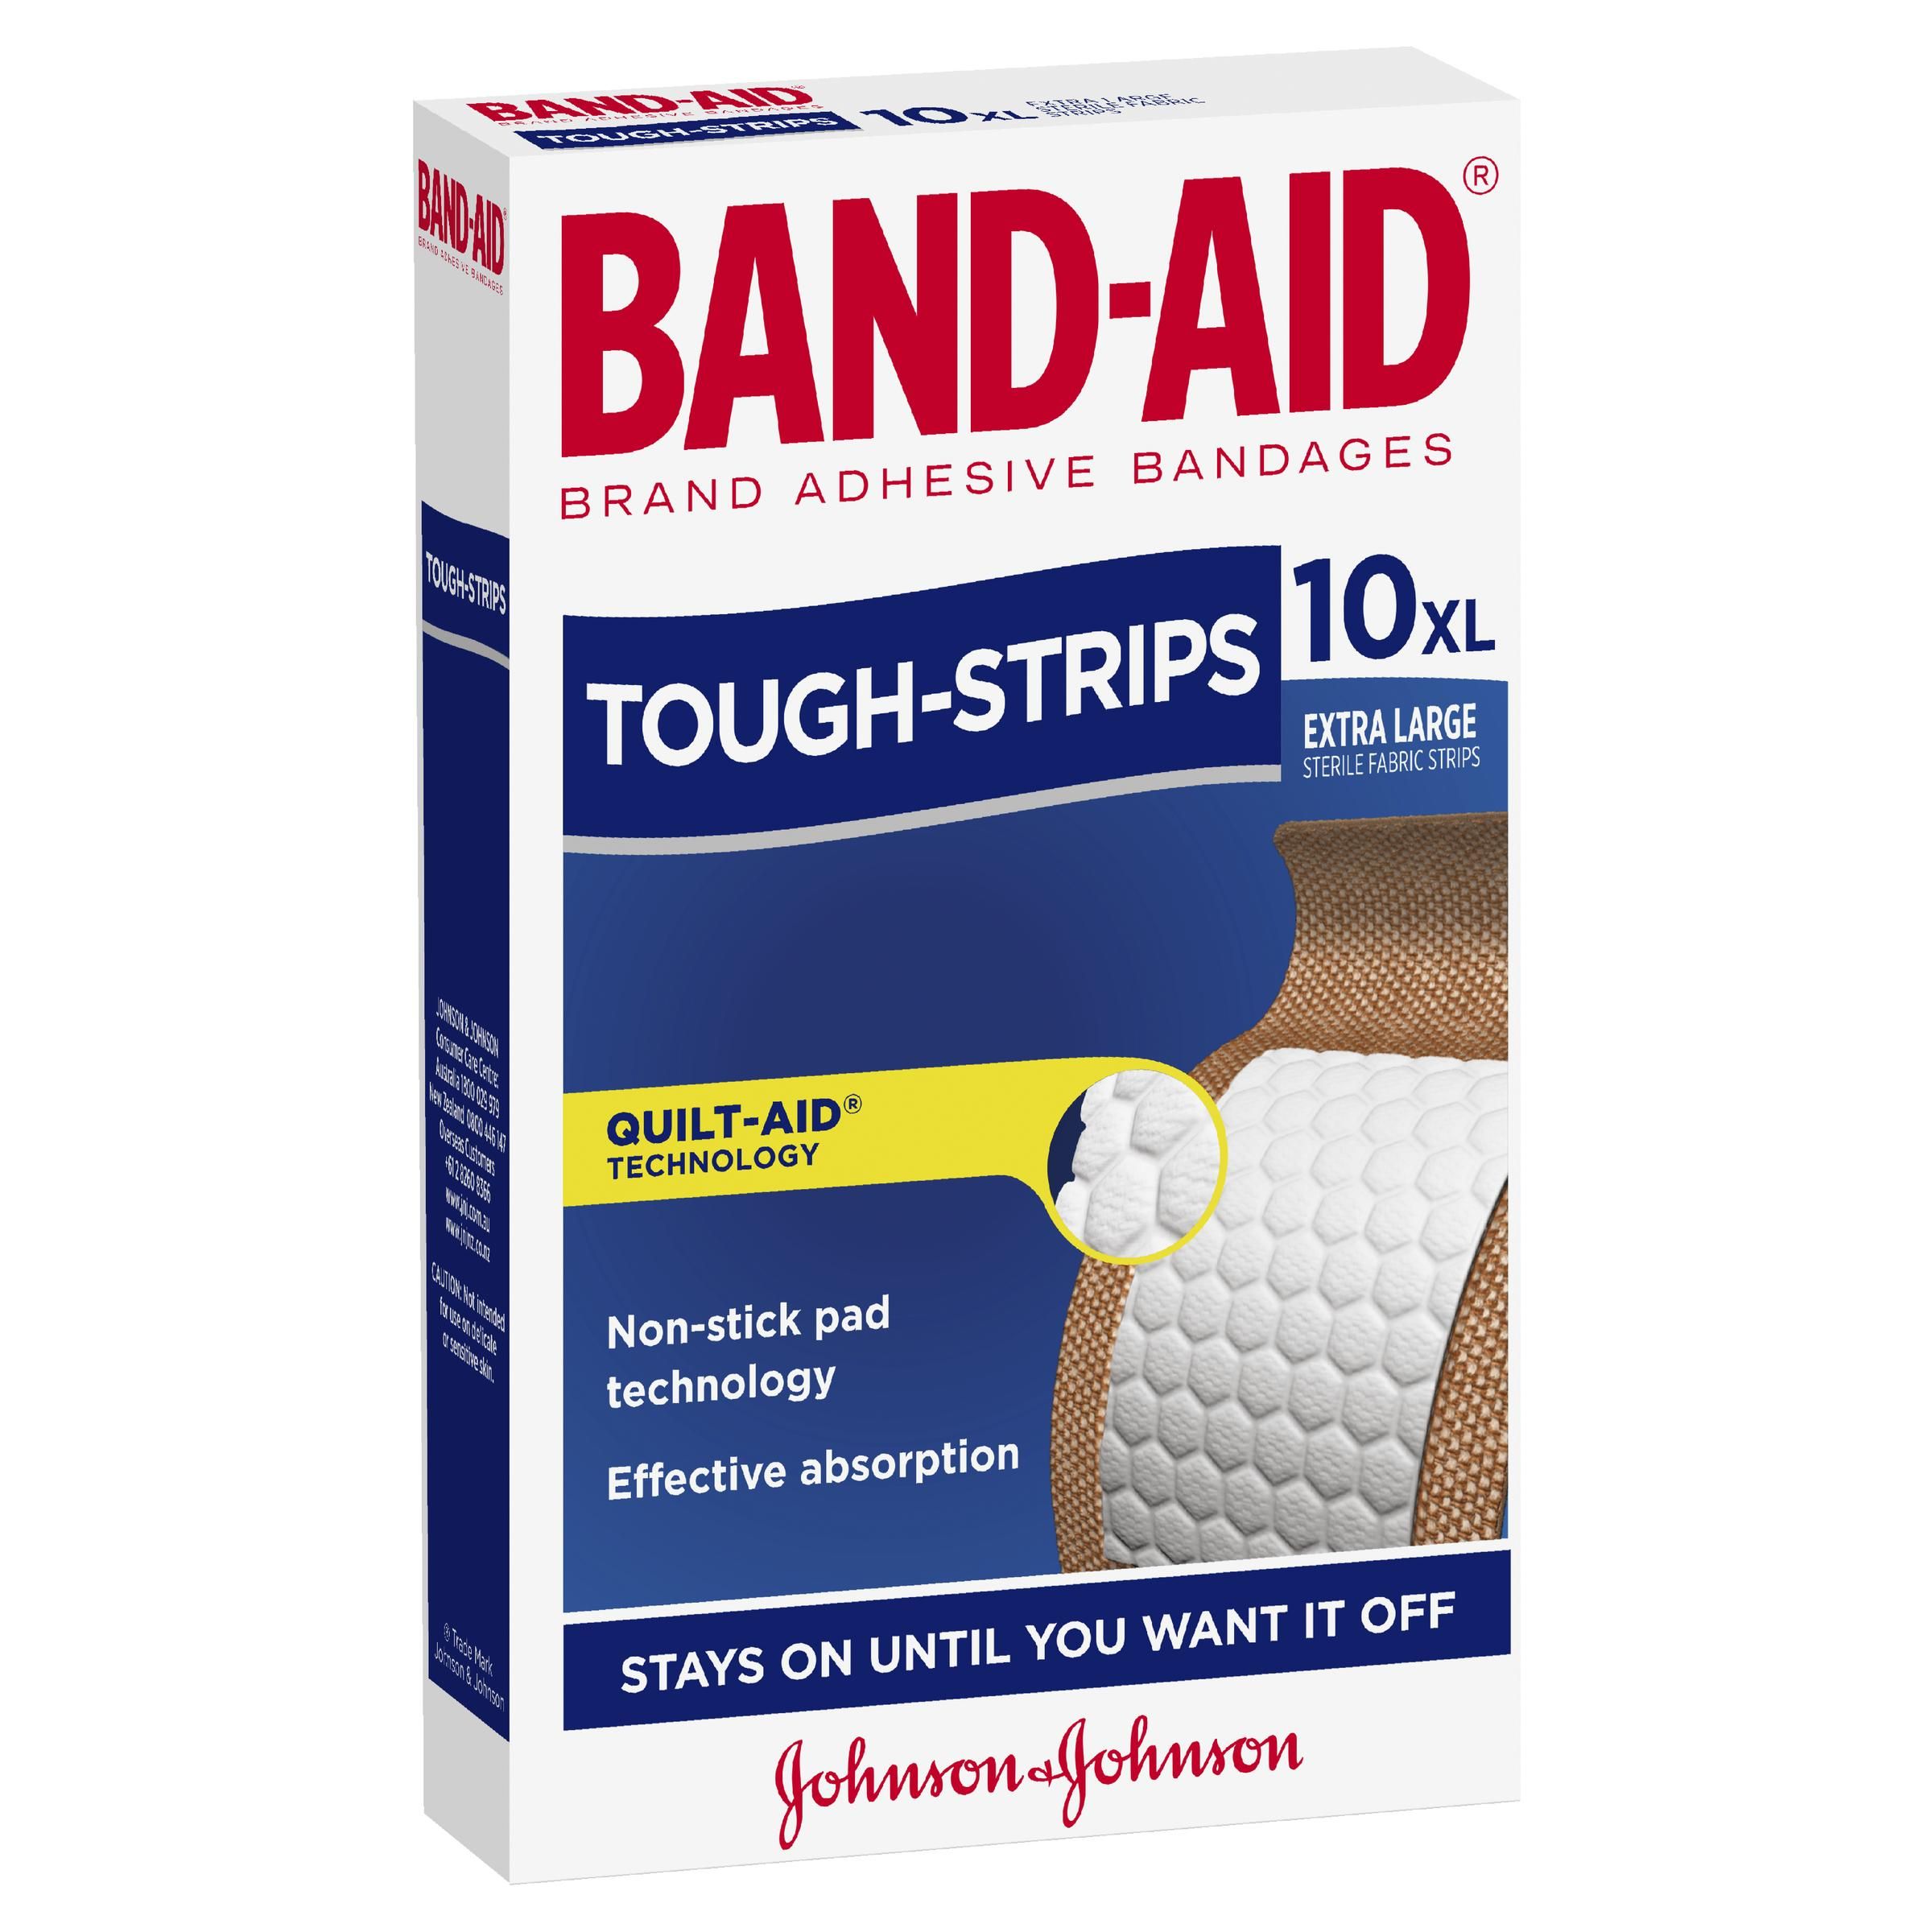 BAND-AID TOUGH STRIPS EXTRA LARGE 10PK - Direct Chemist Outlet